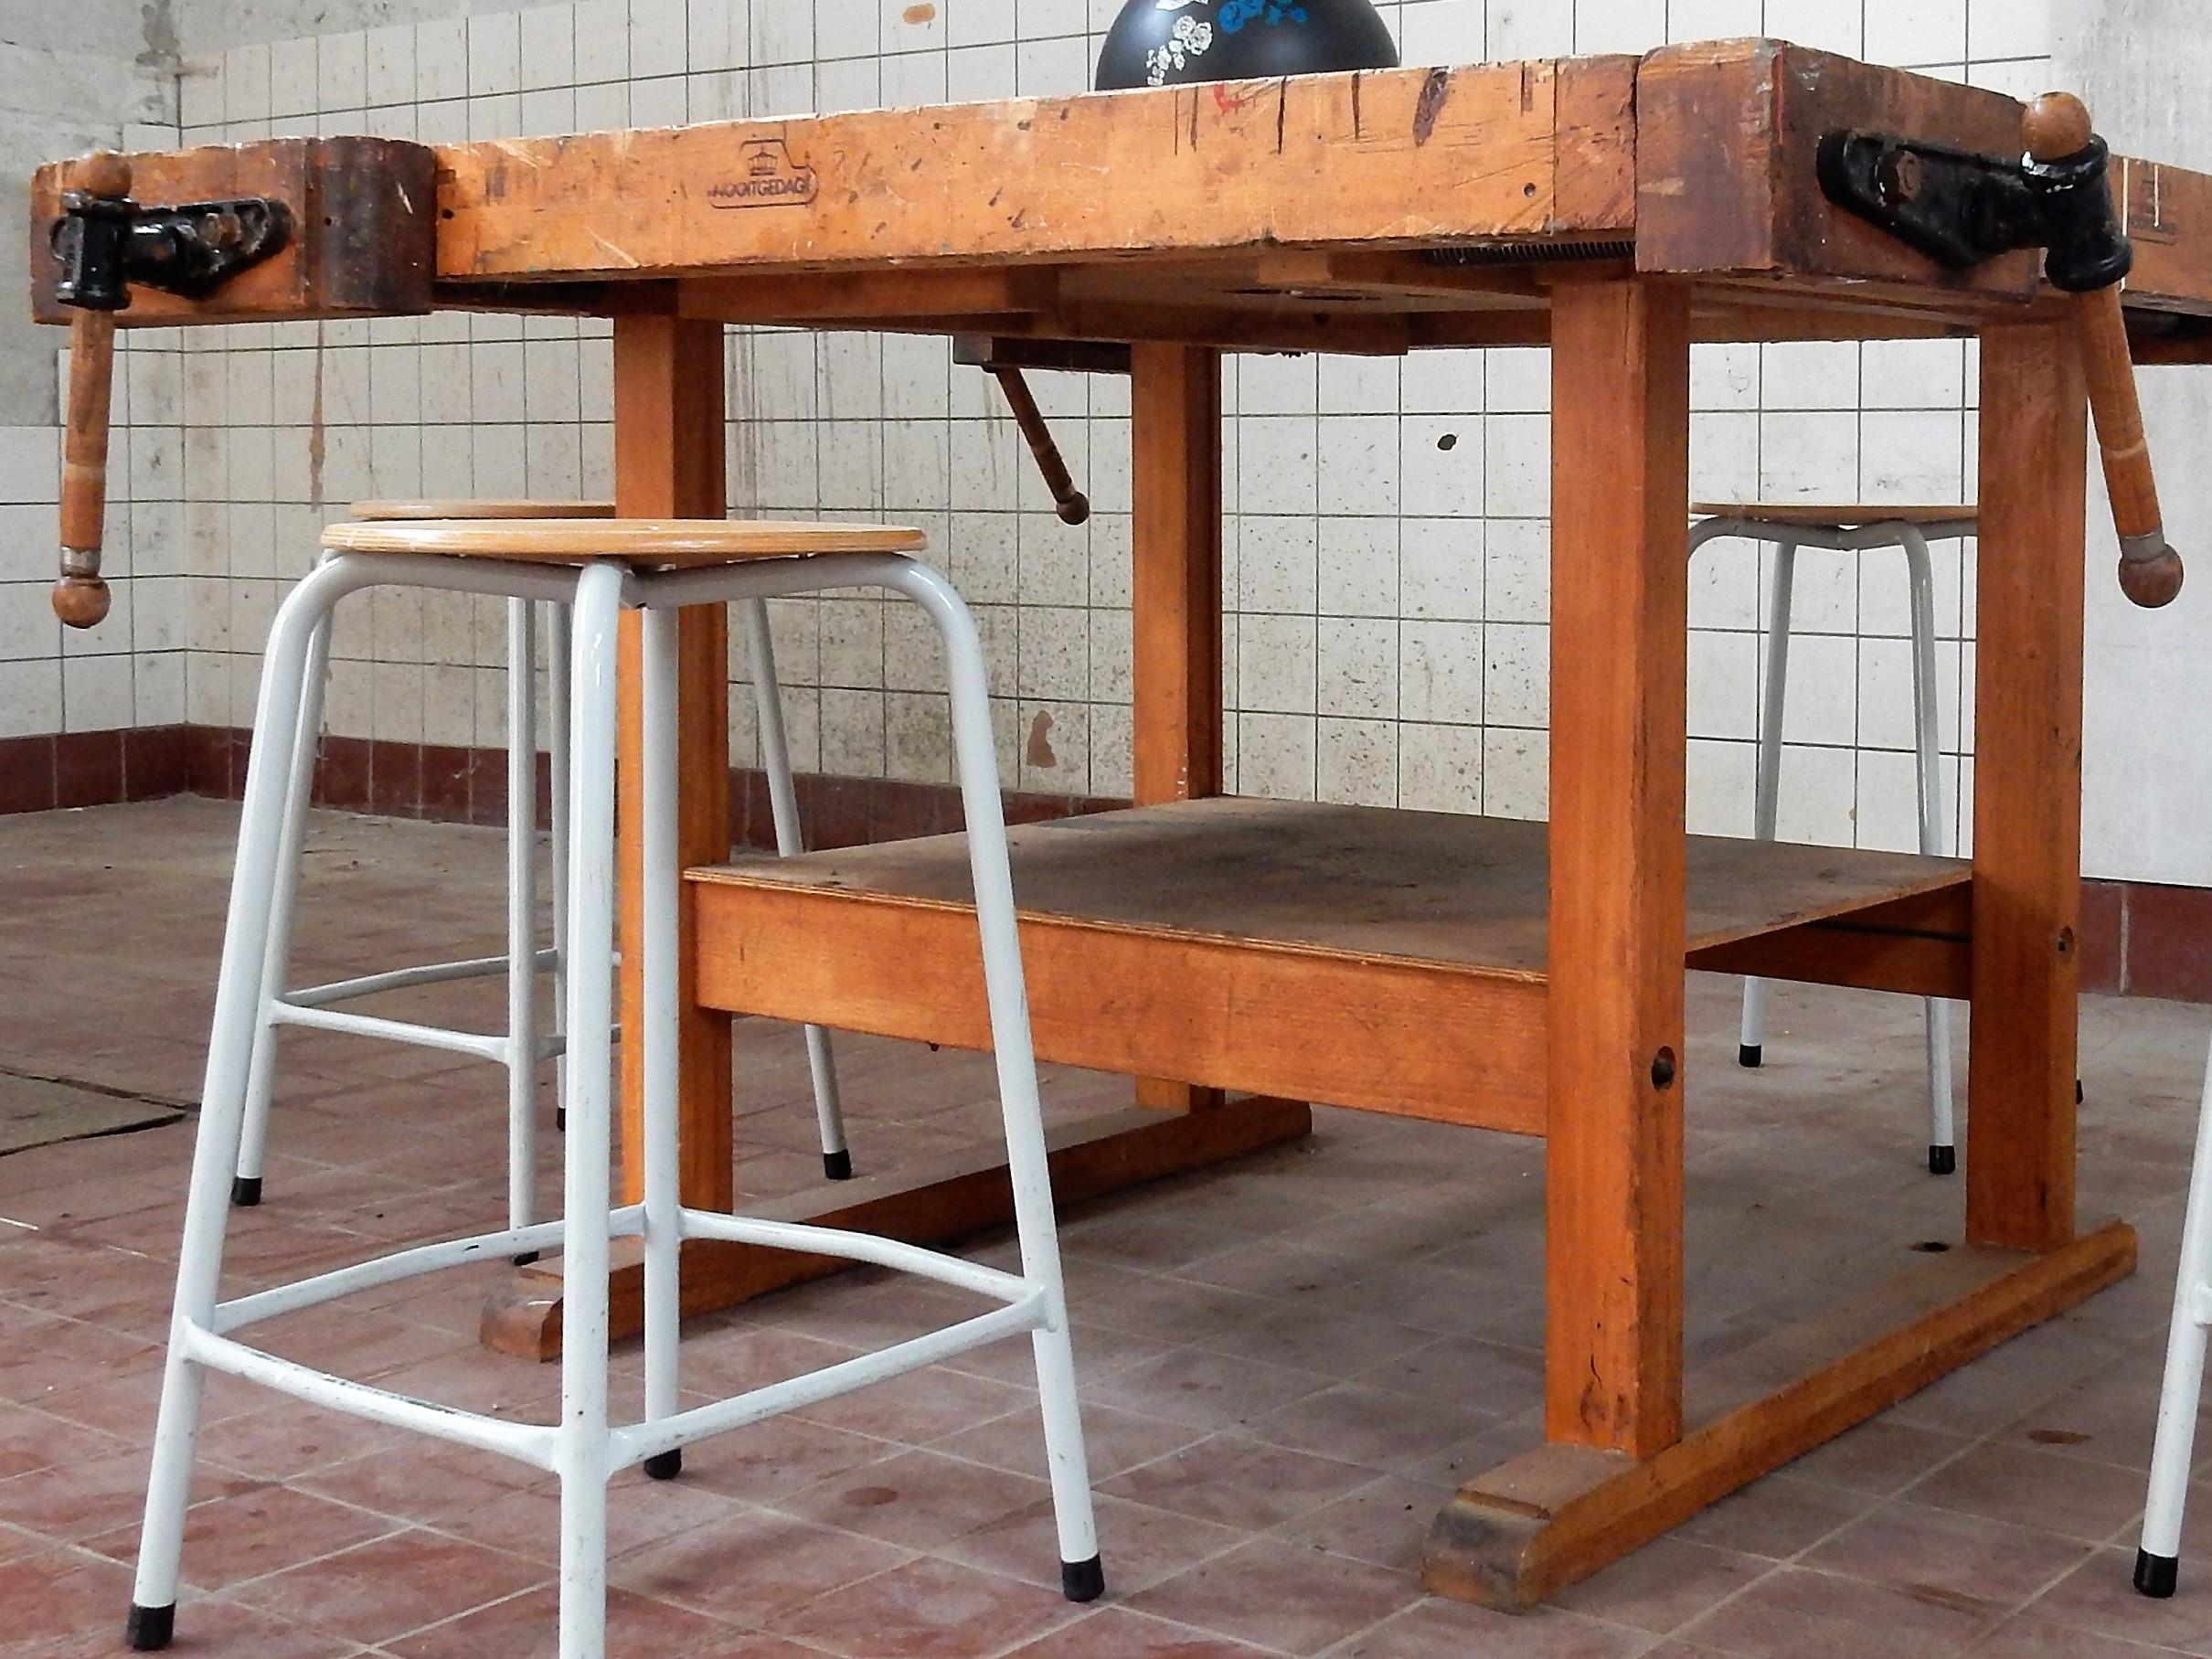 Late 20th Century Vintage Industrial 4-Sided Workbench/Table by Nooitgedagt.